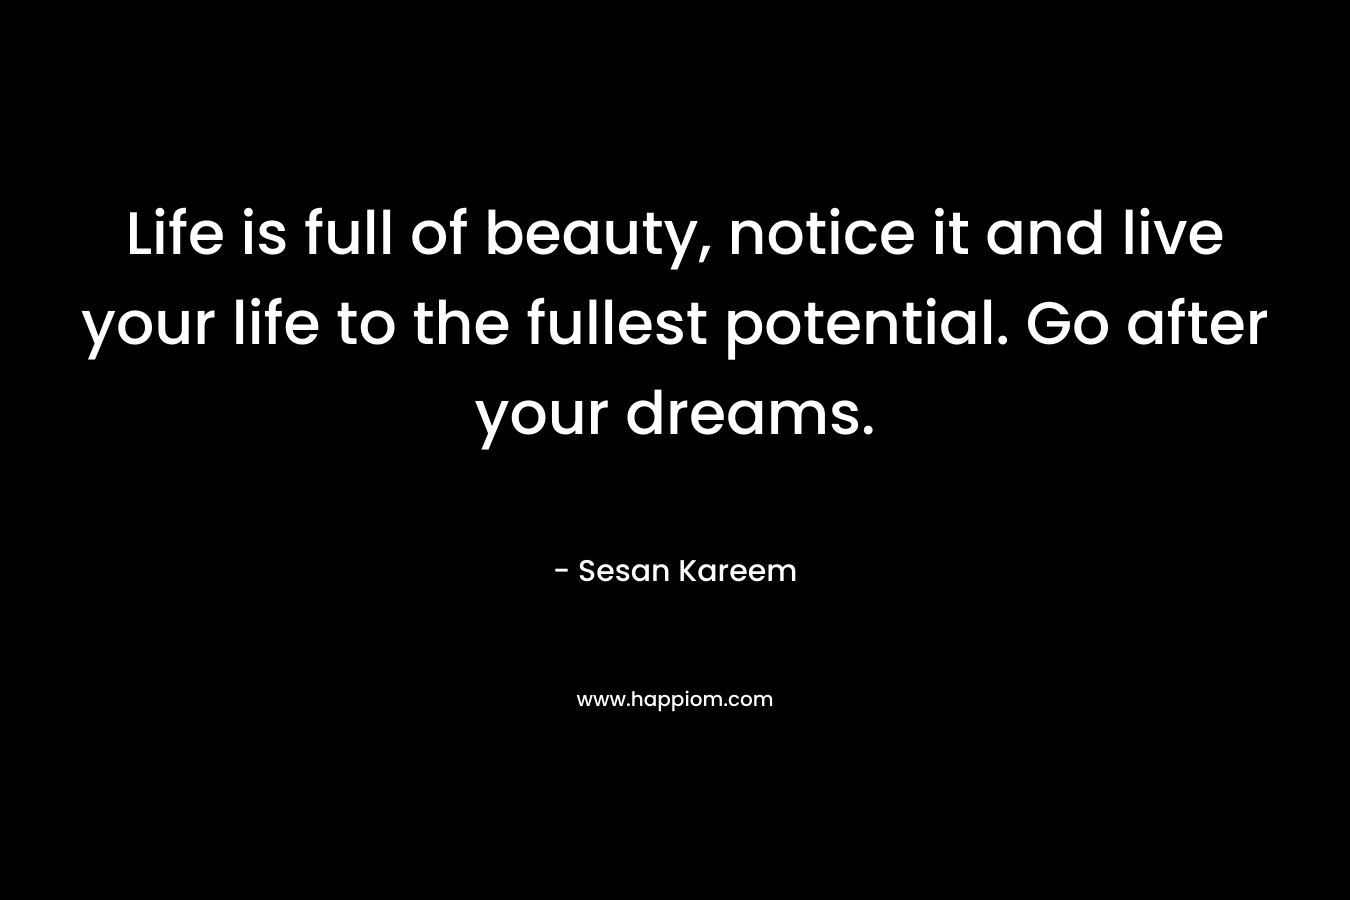 Life is full of beauty, notice it and live your life to the fullest potential. Go after your dreams. – Sesan Kareem